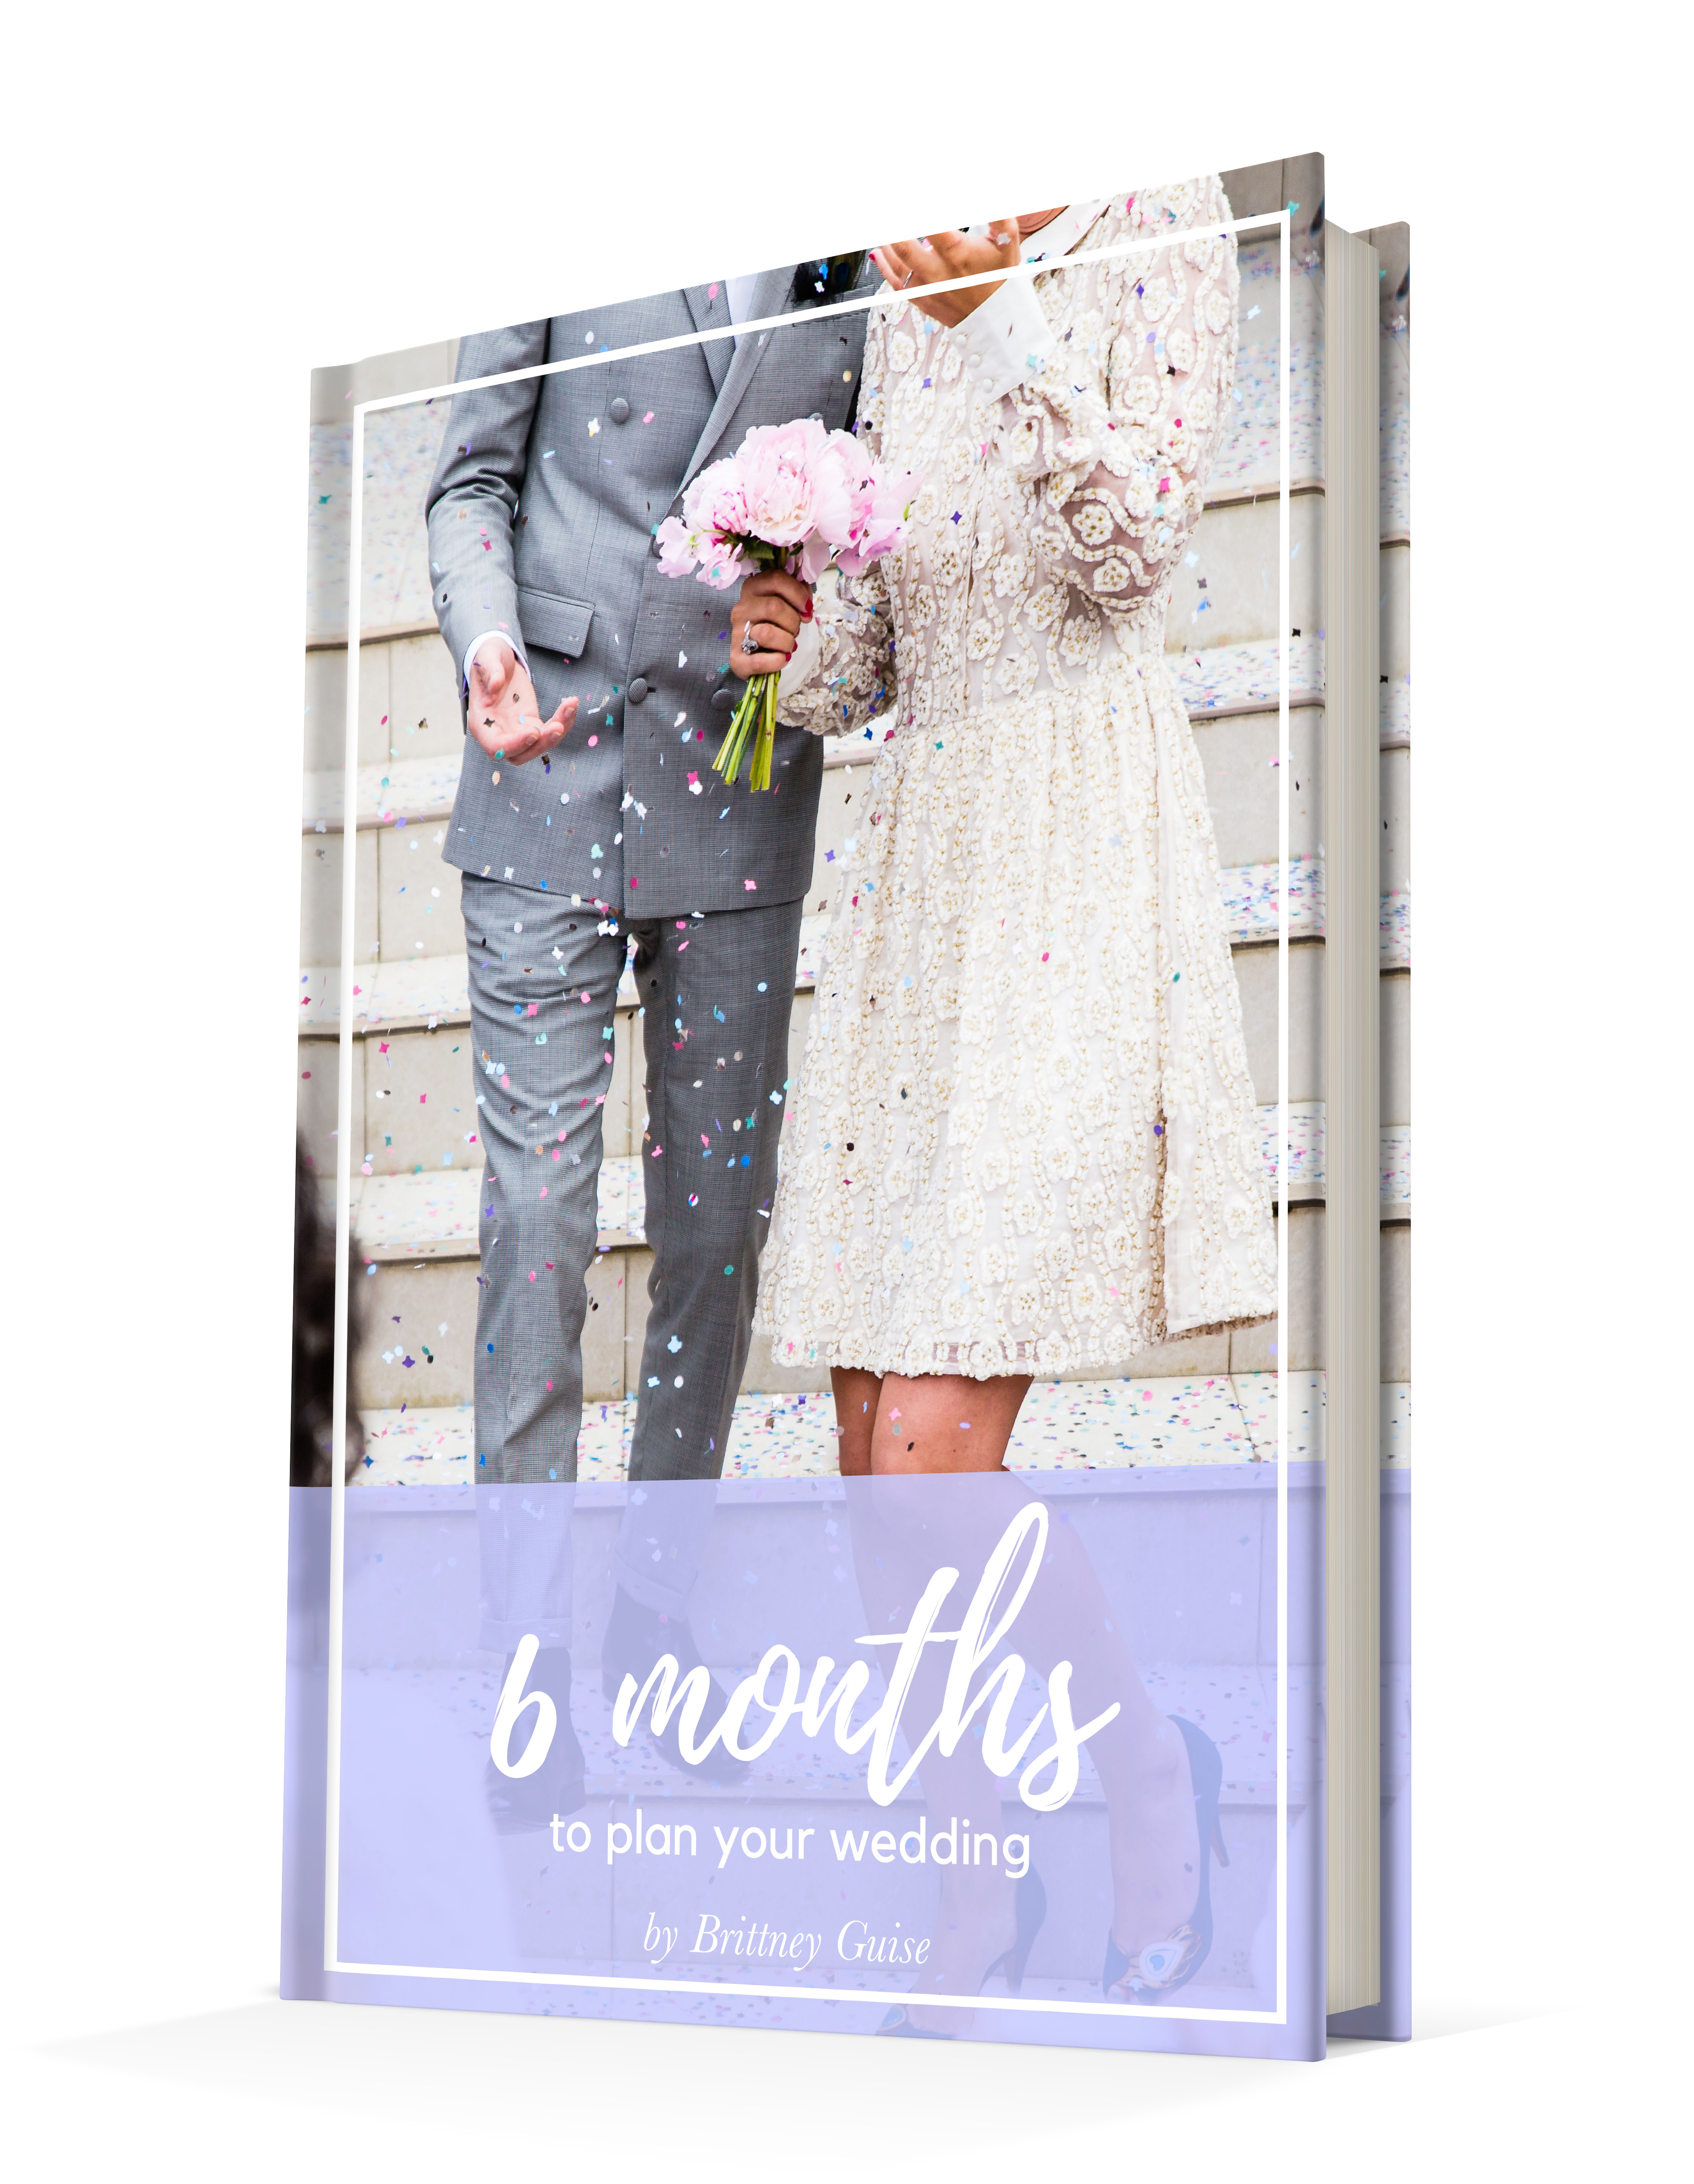 Are you looking for a great resource to help you plan your wedding in just 6 months? This ebook will teach you everything you need to know, from when you first get engaged, through to after the wedding!